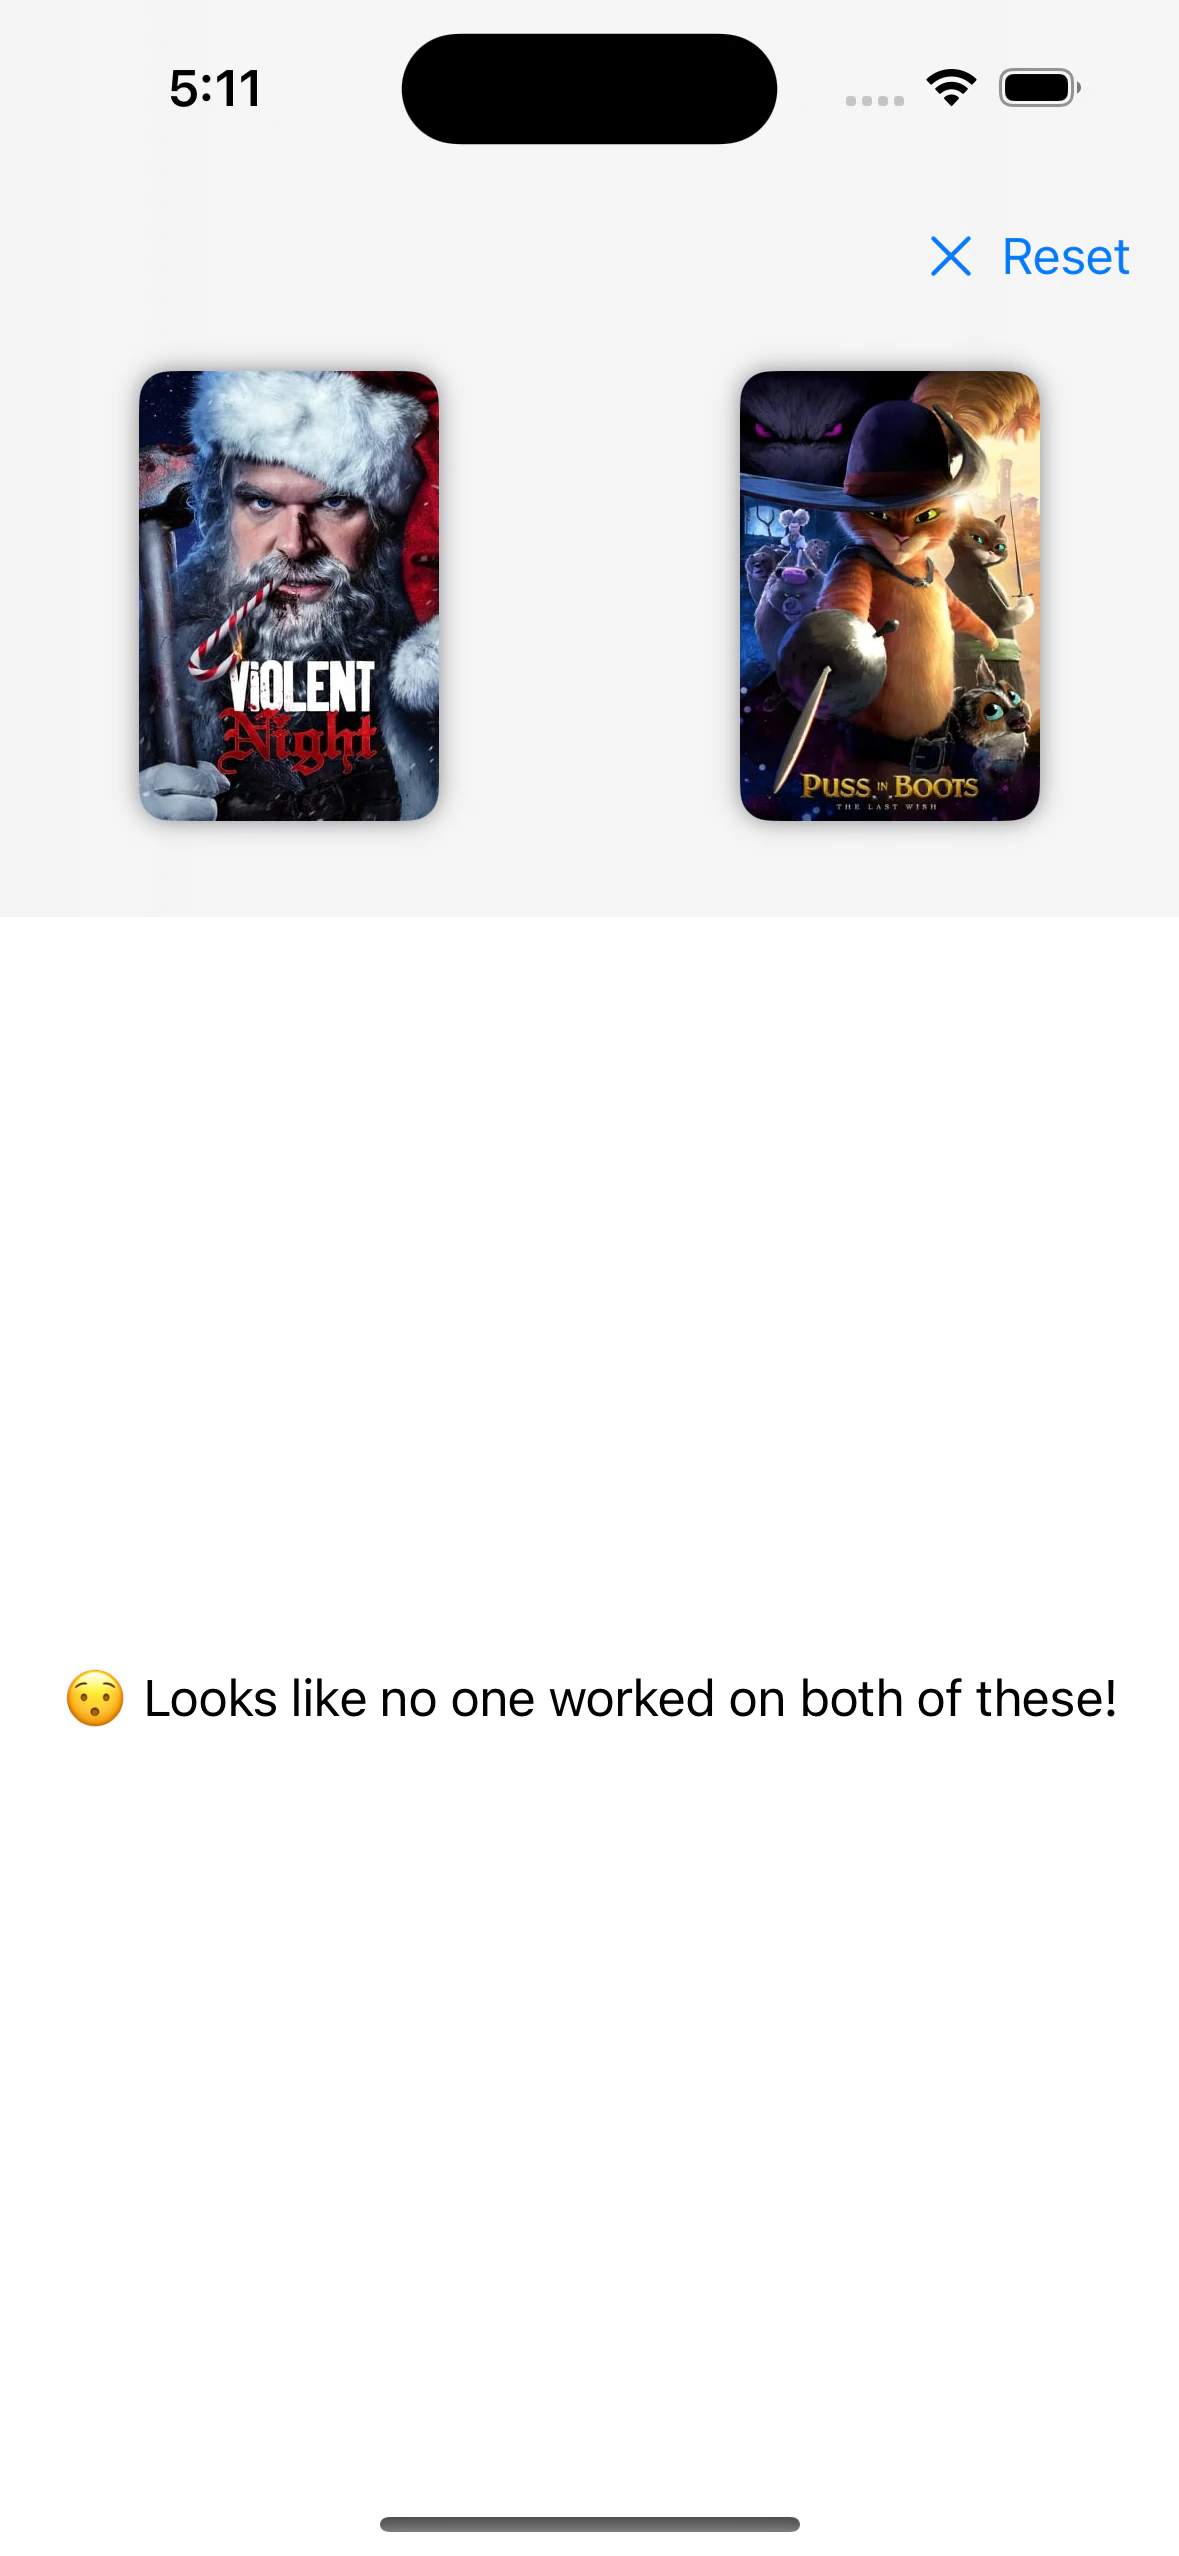 A screenshot of a comparison of the movies "Violent Night" and "Puss in Boots" showing that no one worked on both of these movies.